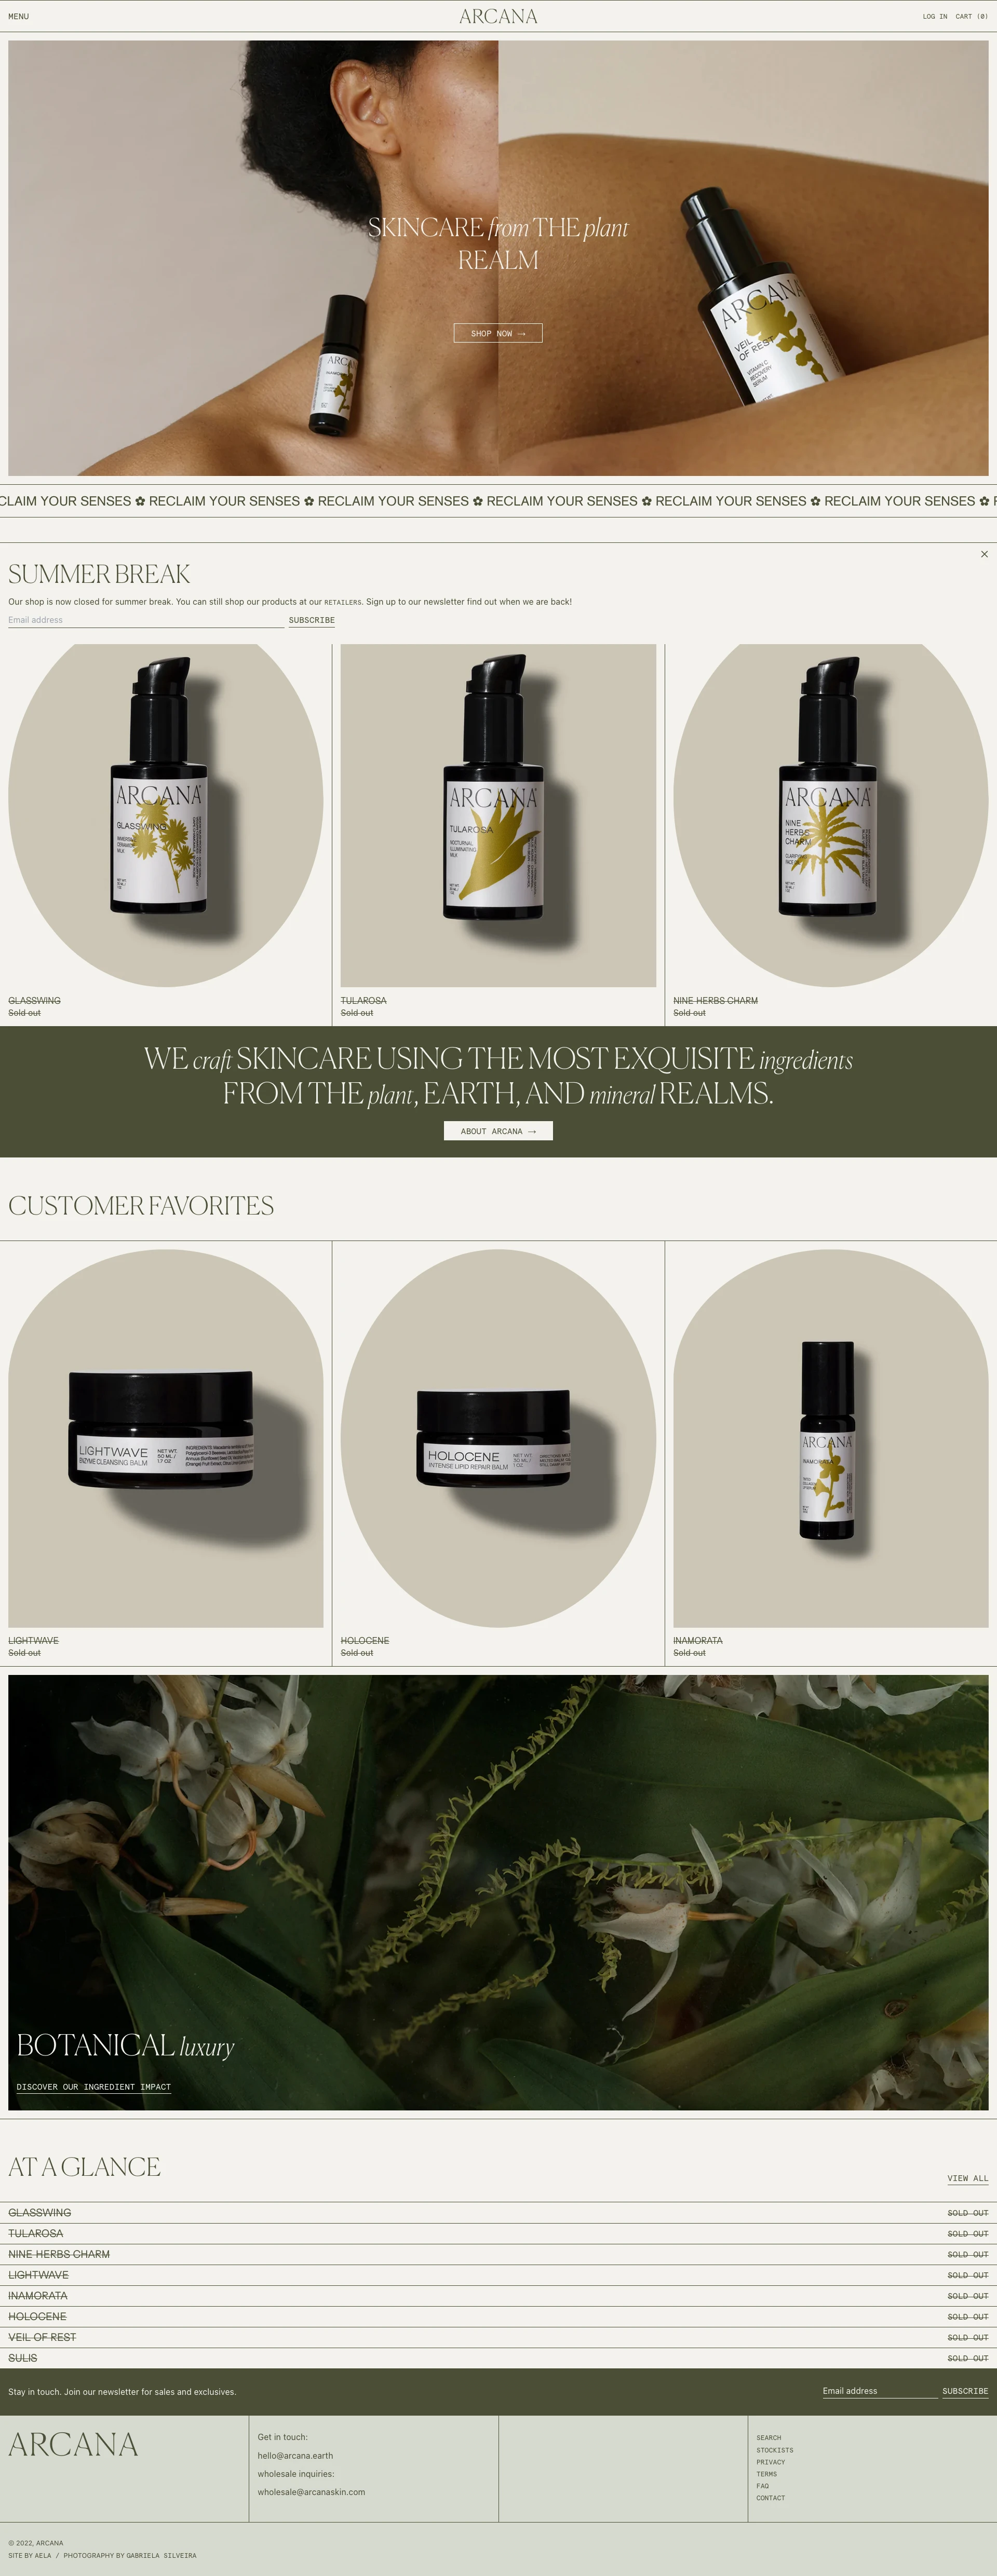 Arcana Landing Page Example: We craft skincare using the most exquisite ingredients from the earth, plant, and mineral realms.